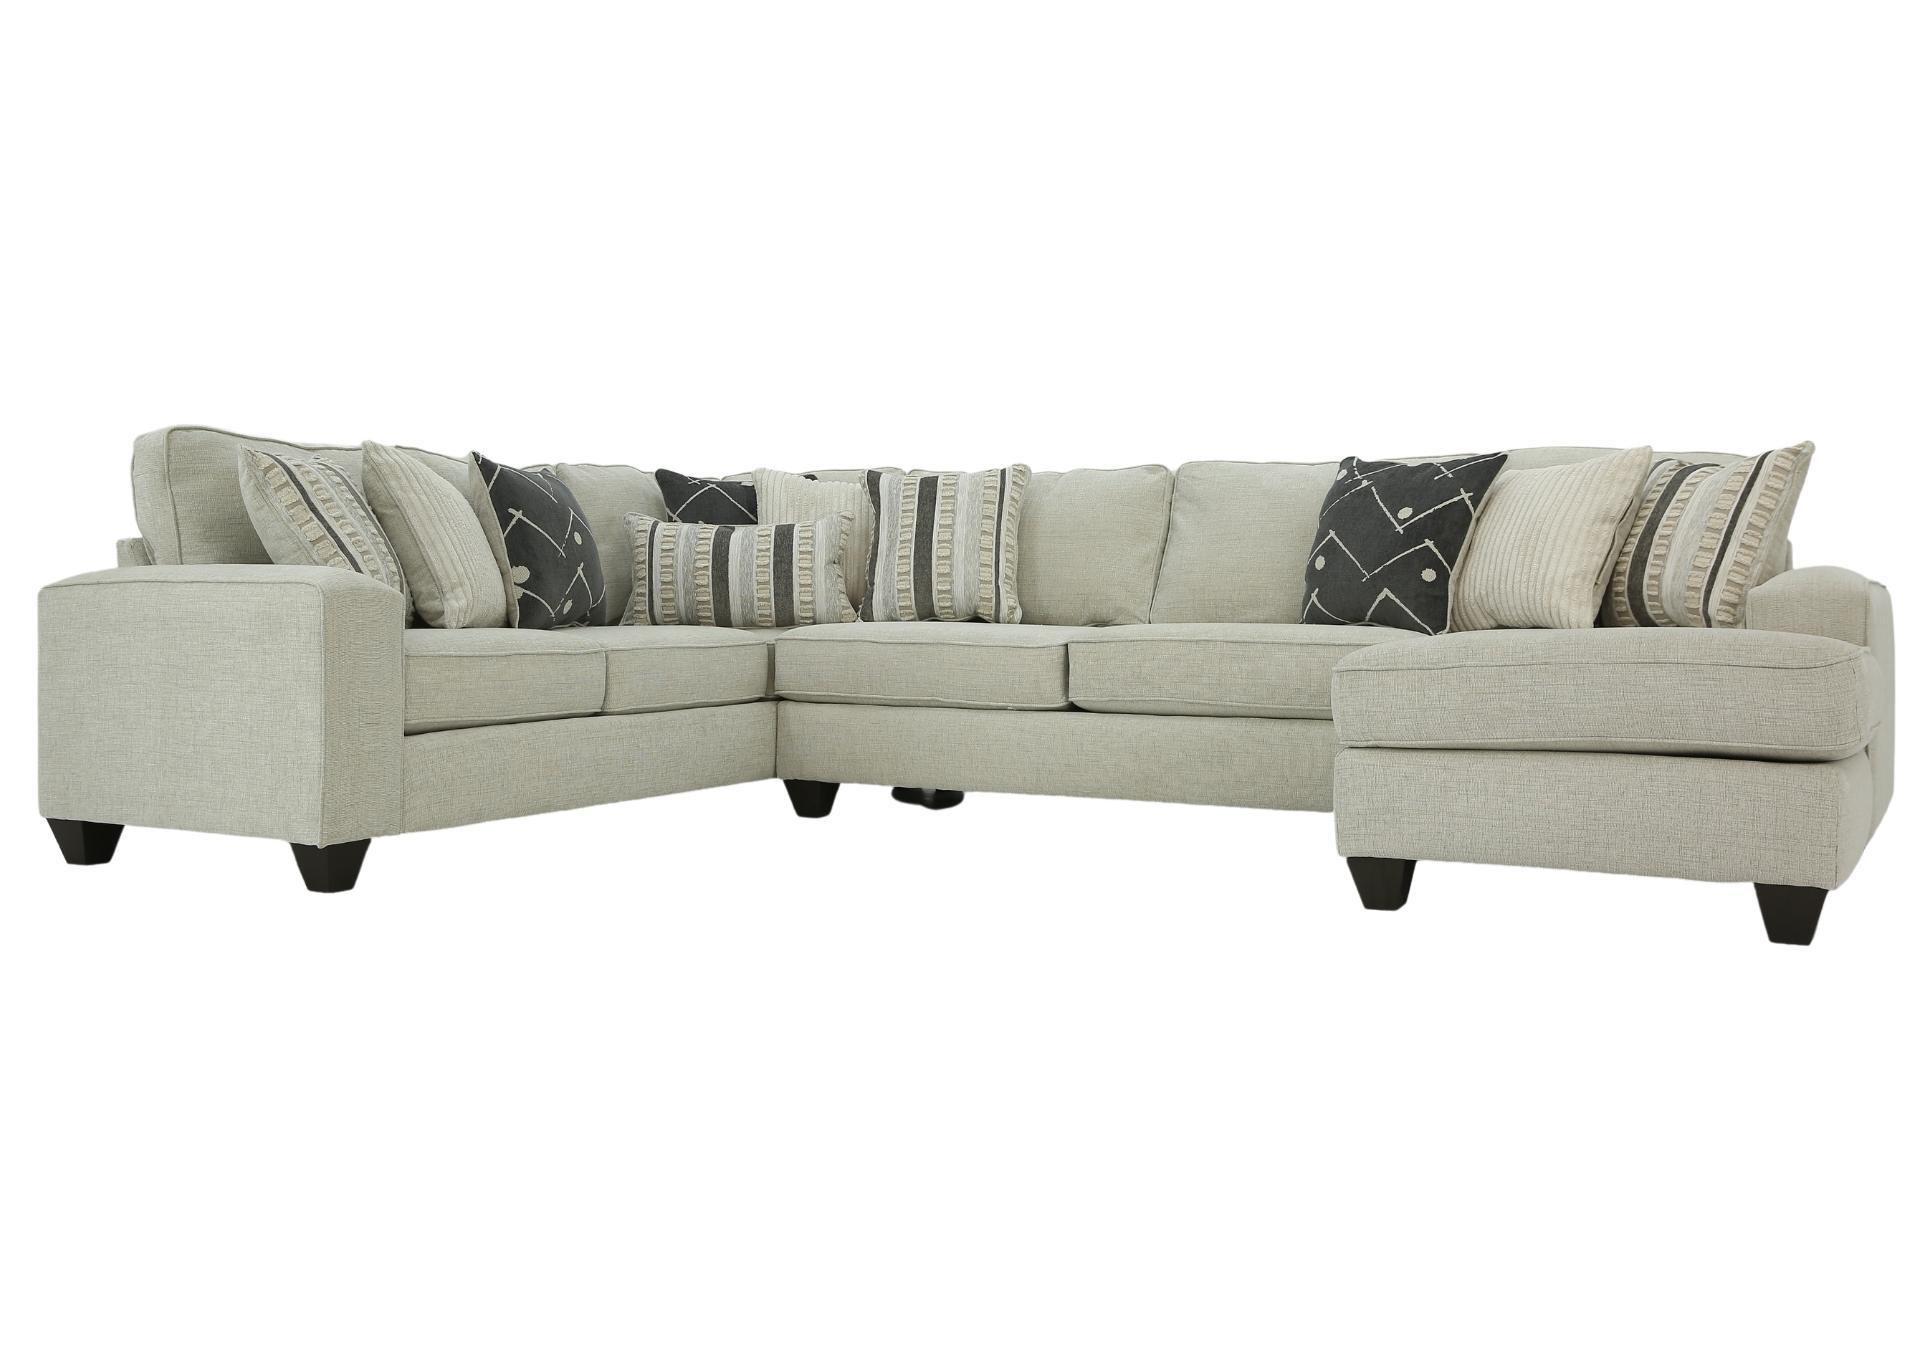 PERSIA BEIGE 3 PIECE SECTIONAL